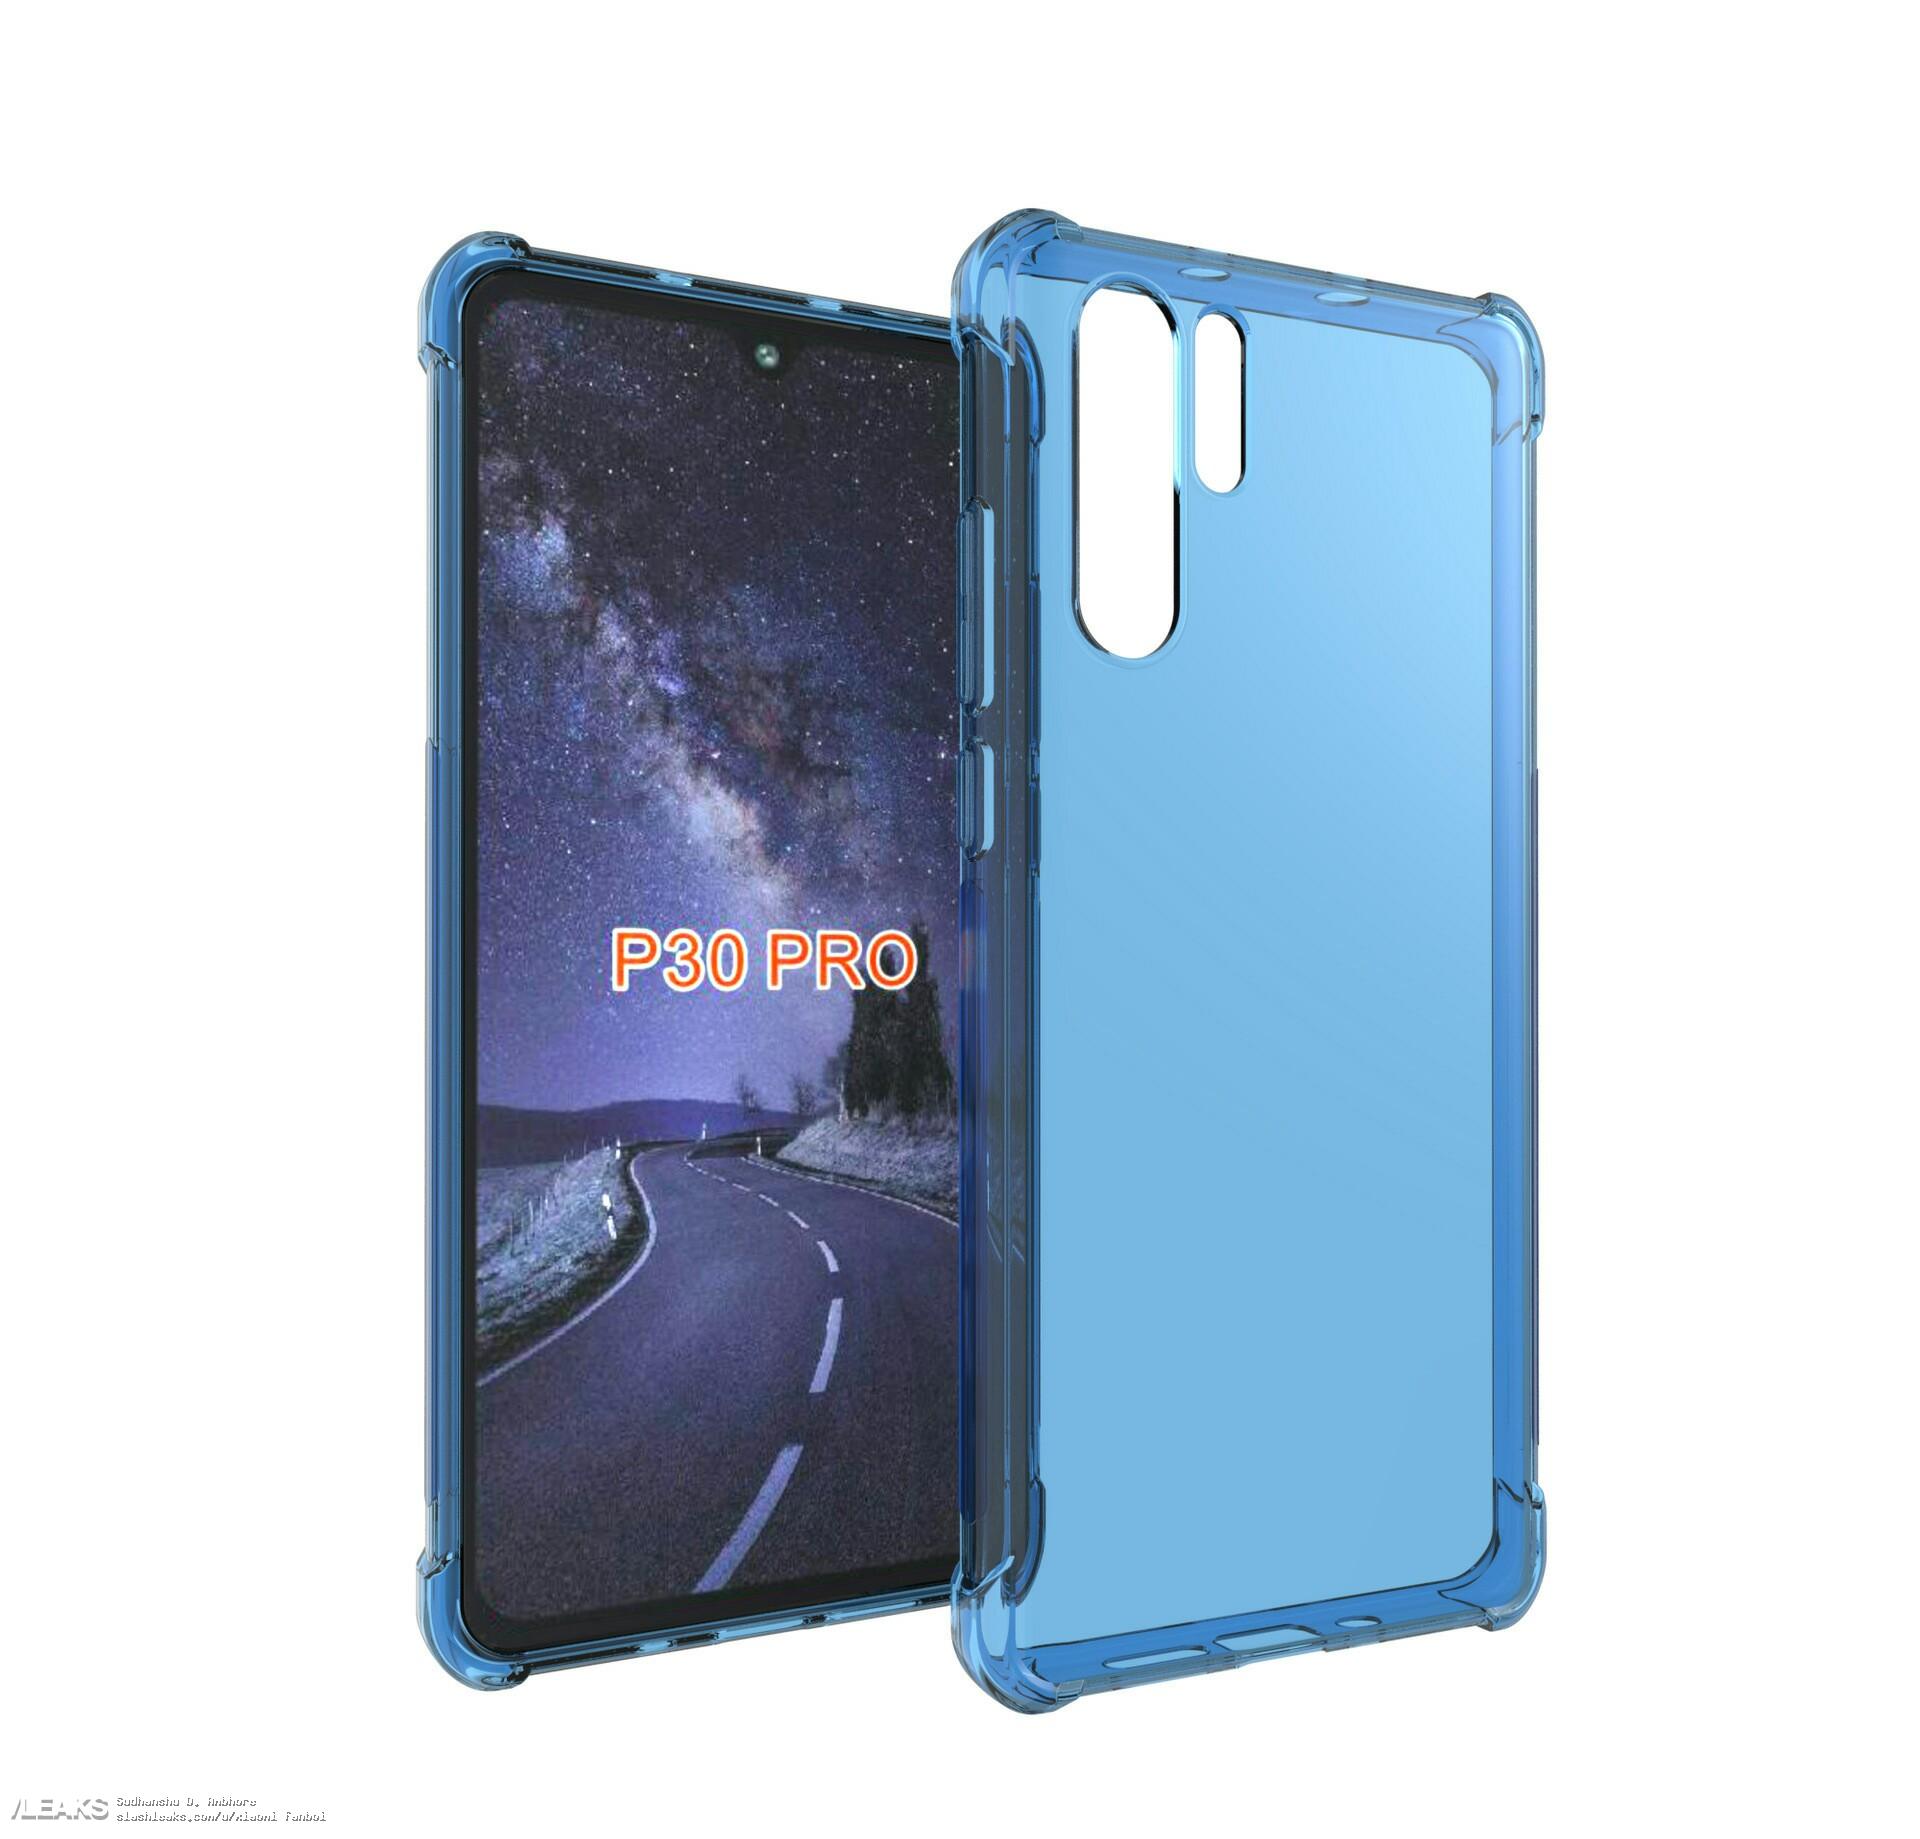 huawei p30 pro cases leaked 667